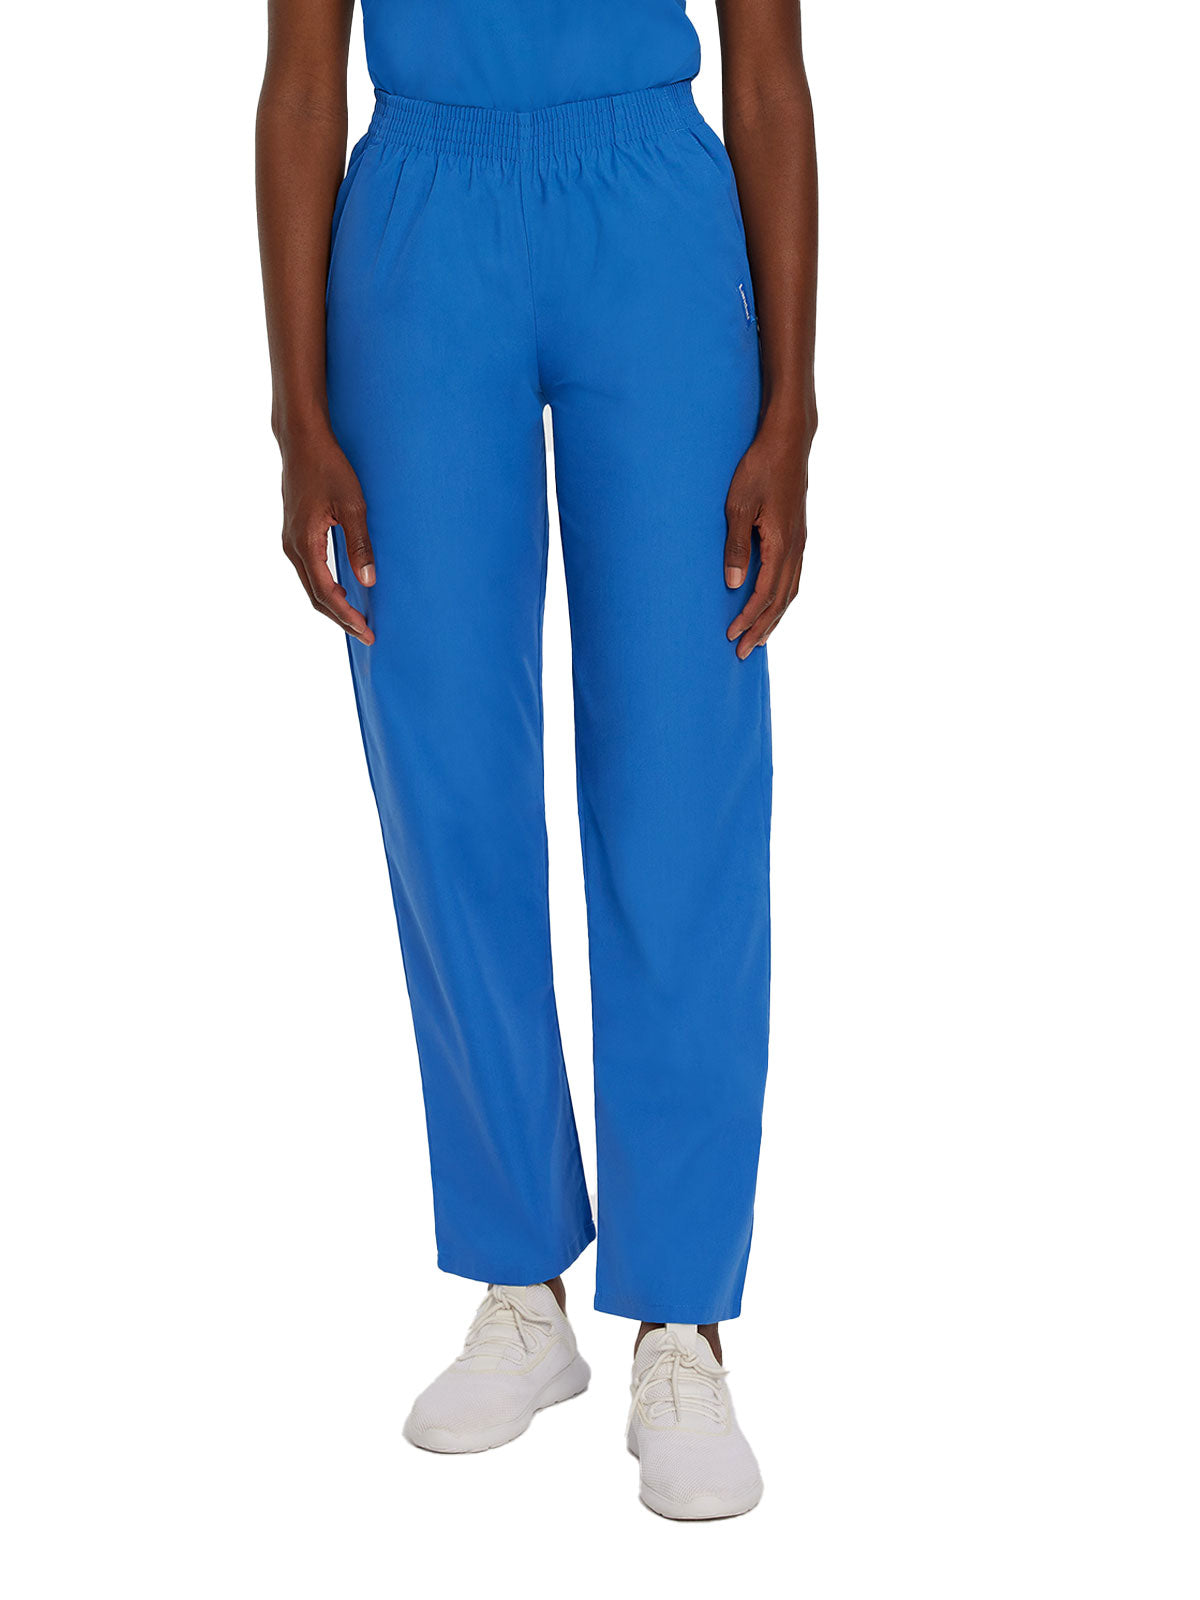 Essentials - Women's Classic Relaxed Fit Scrub Pant [2]